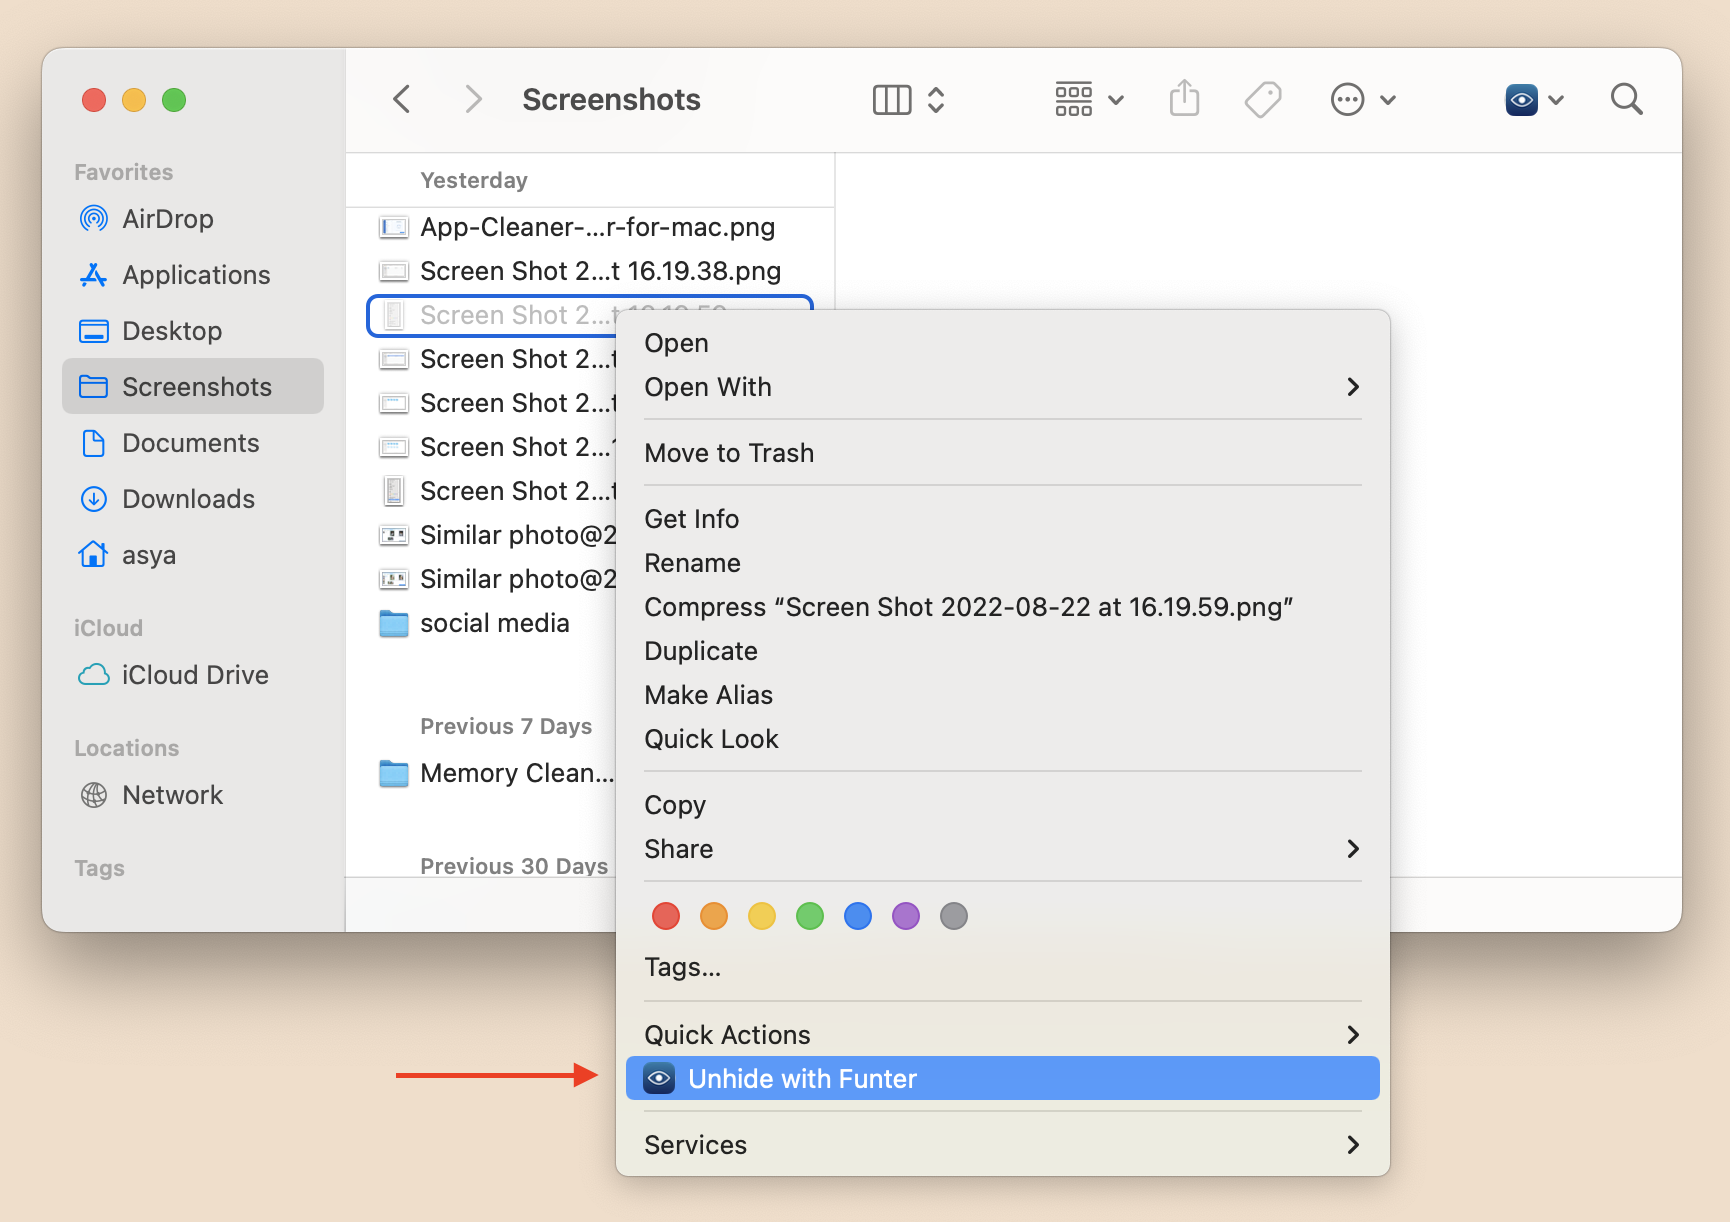 Unhide with Funter context menu command selected for folder